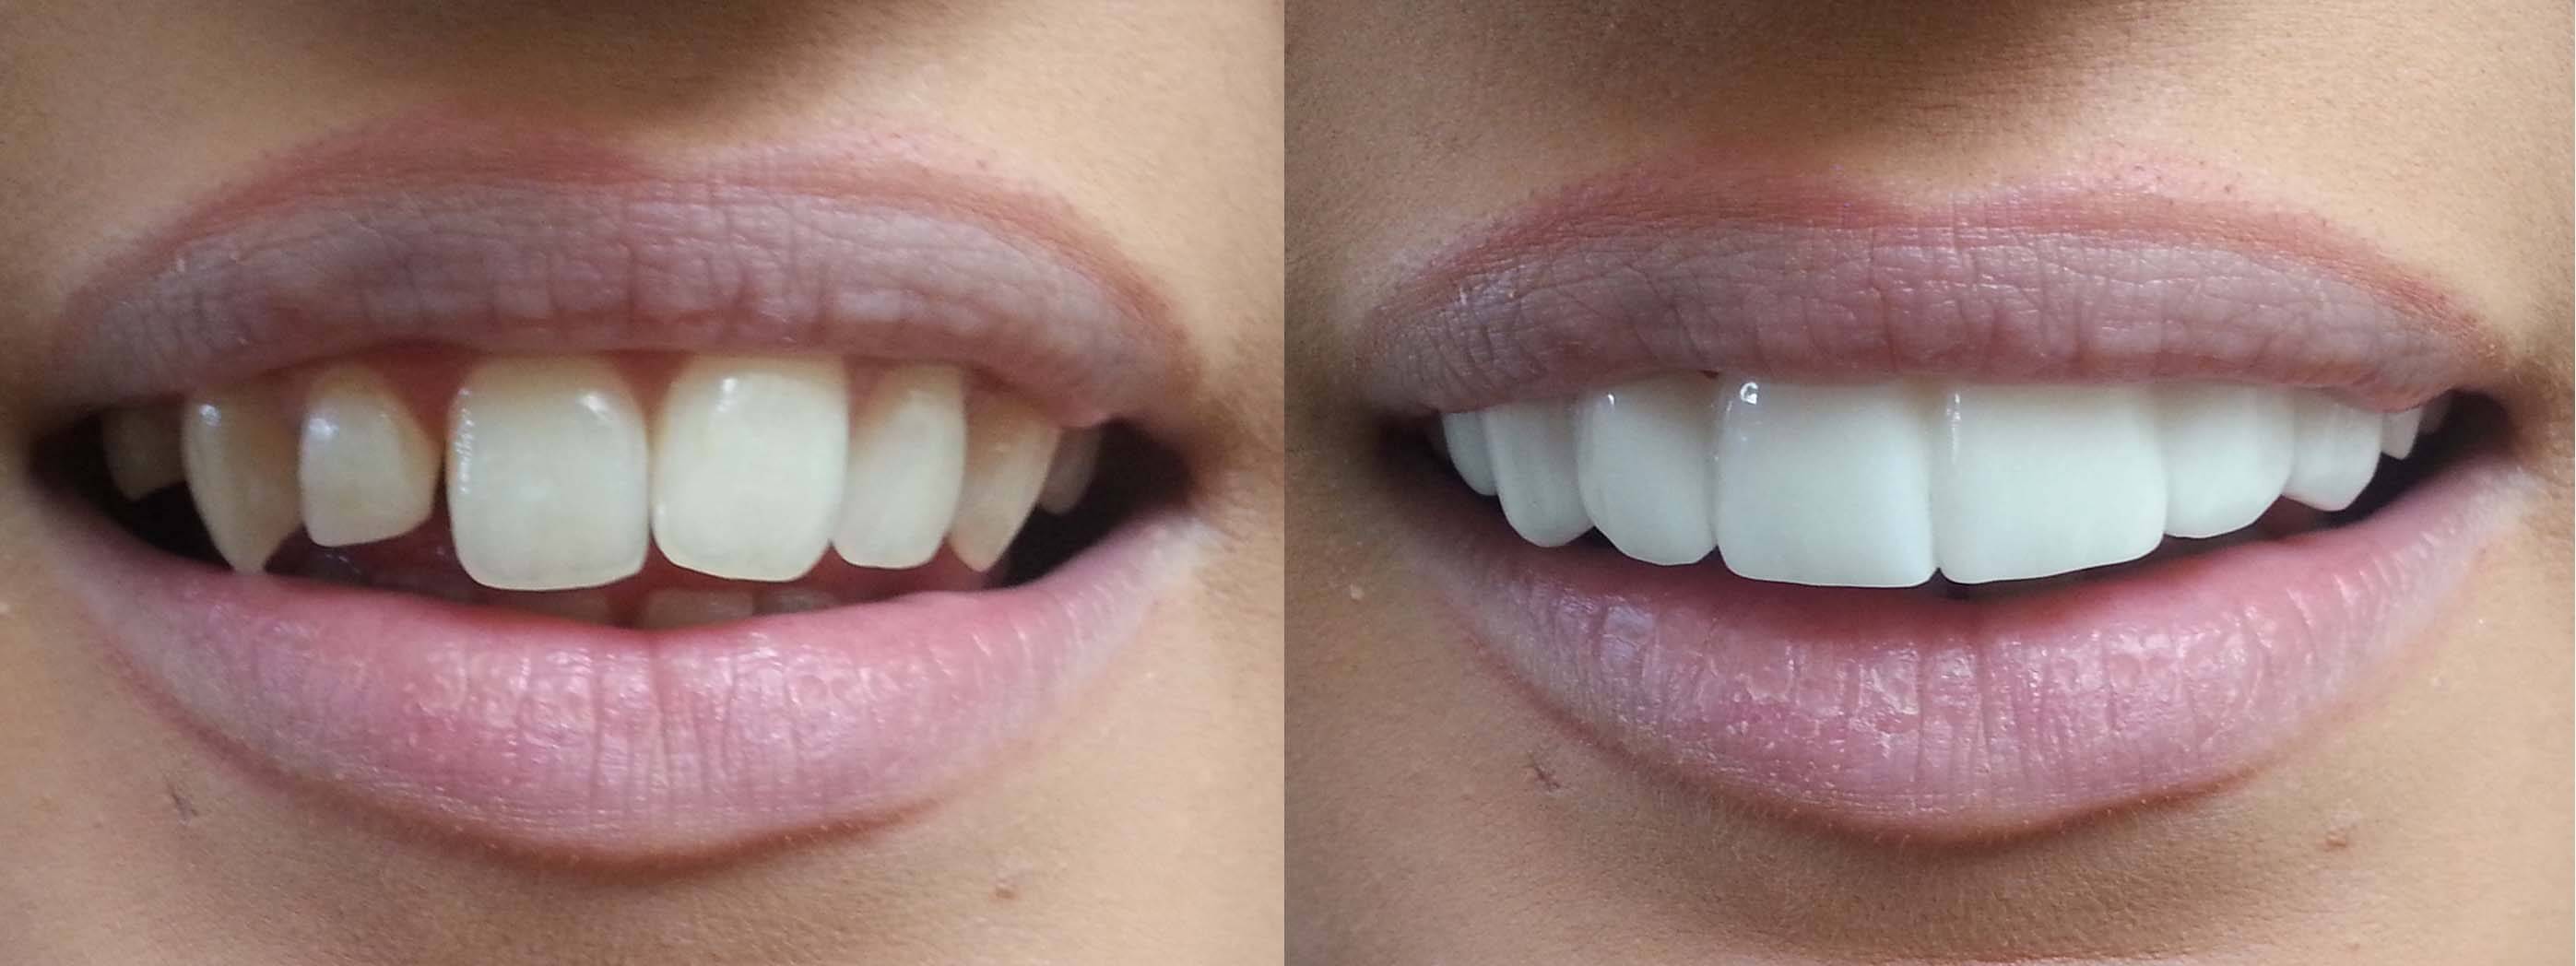 Lifexpe LXP Life Experience at the dentist clip on veneers teeth tooth bleaching shades before and afters